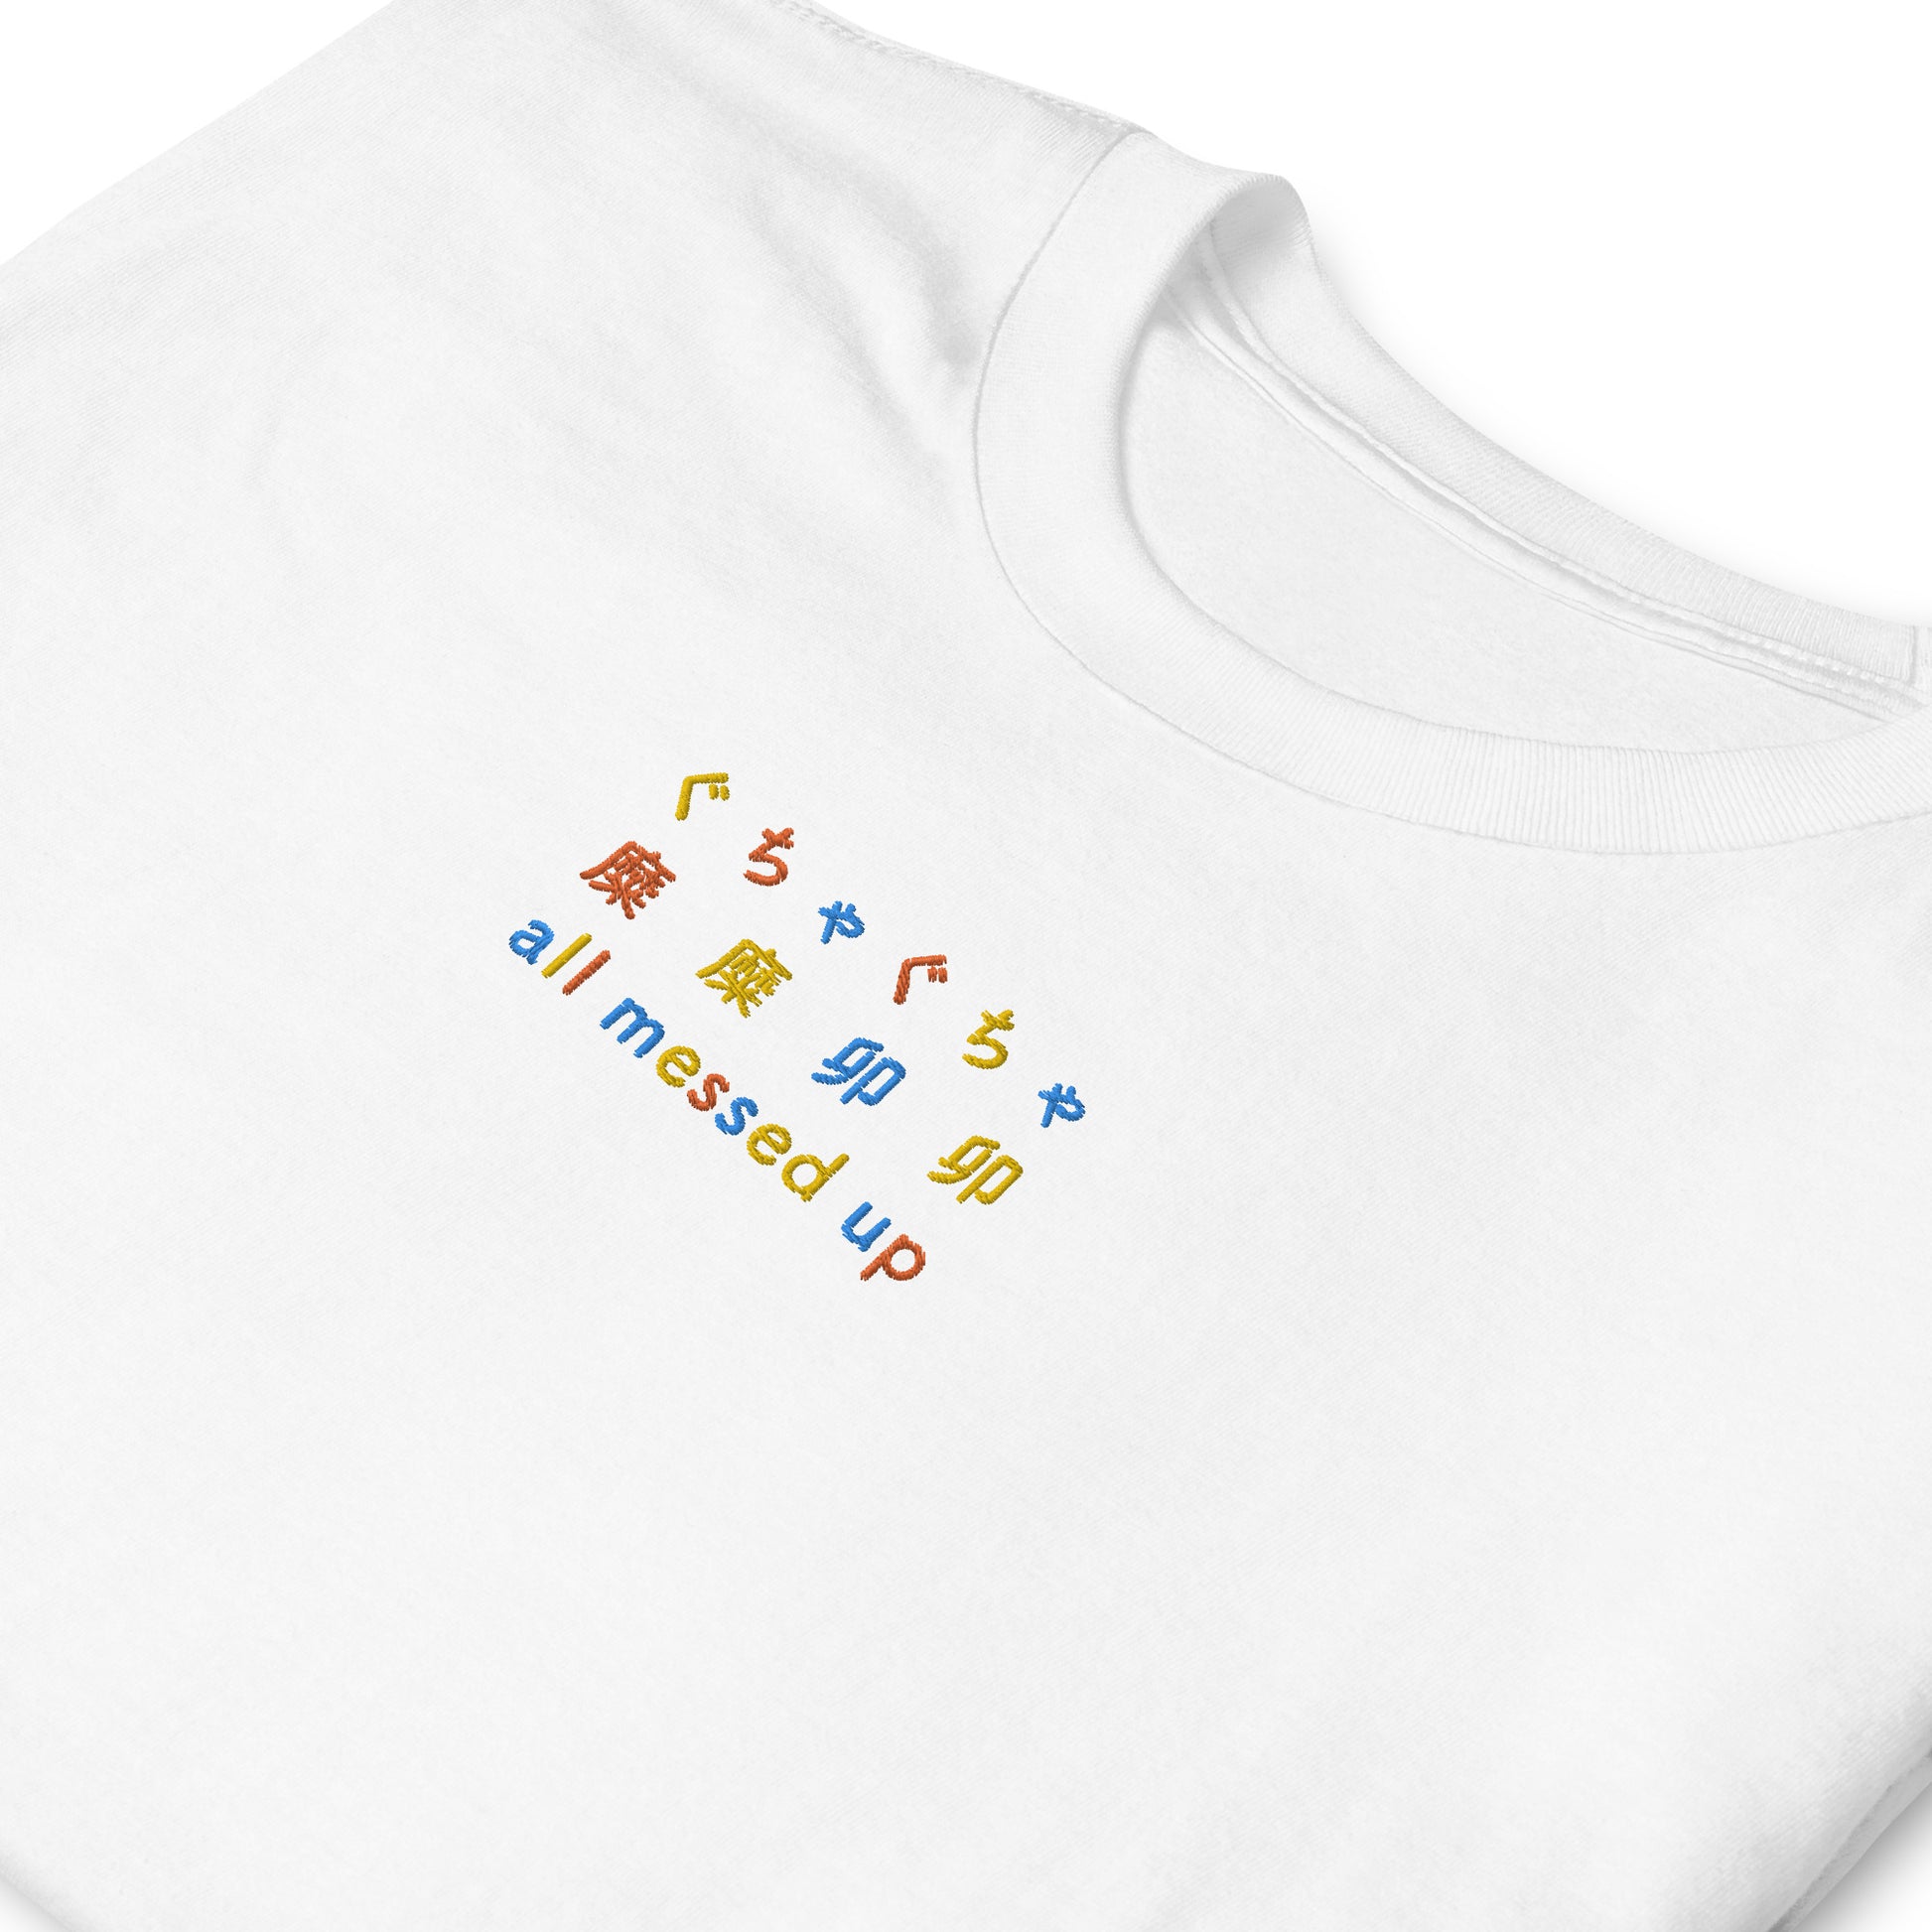 White High Quality Tee - Front Design with an Yellow,Orange,Blue Embroidery "All Messed Up" in Japanese,Chinese and English